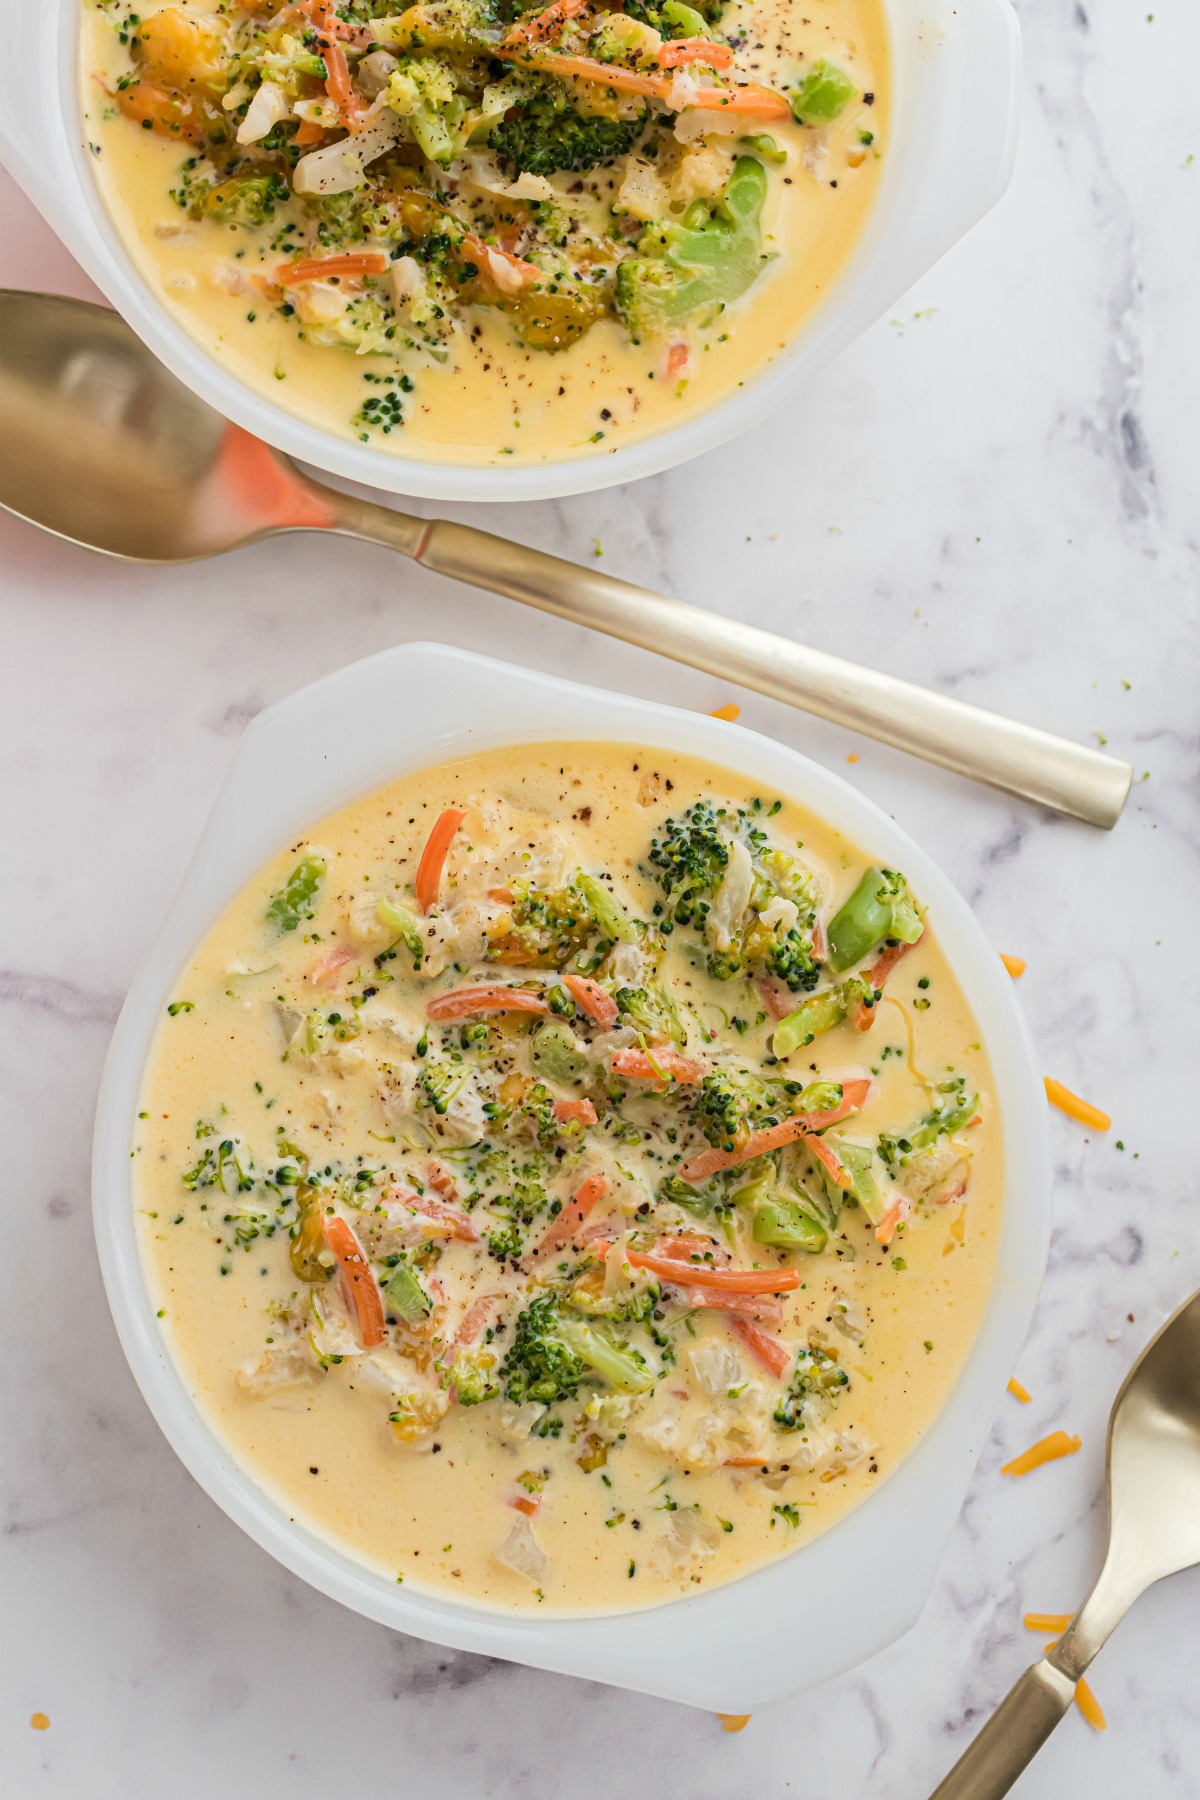 Broccoli cheese soup served in two white bowls.